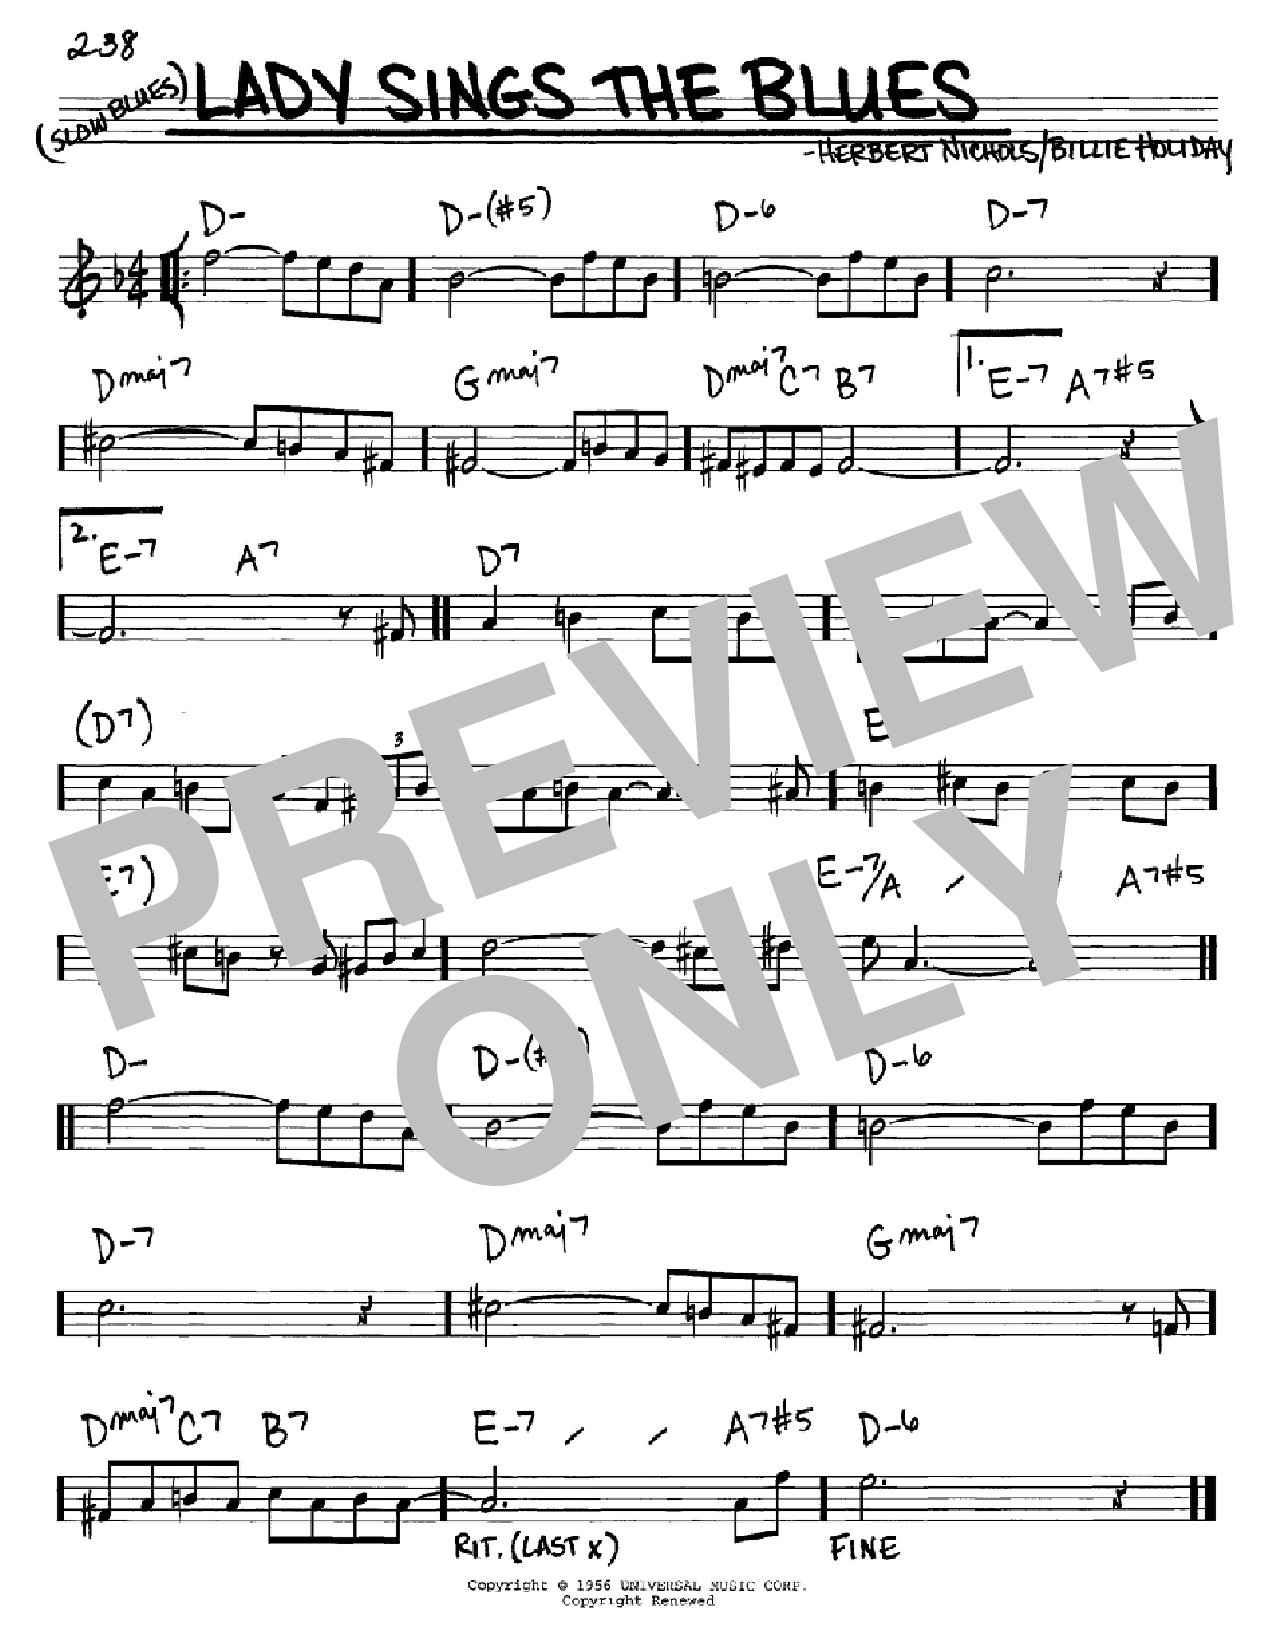 Download Billie Holiday Lady Sings The Blues Sheet Music